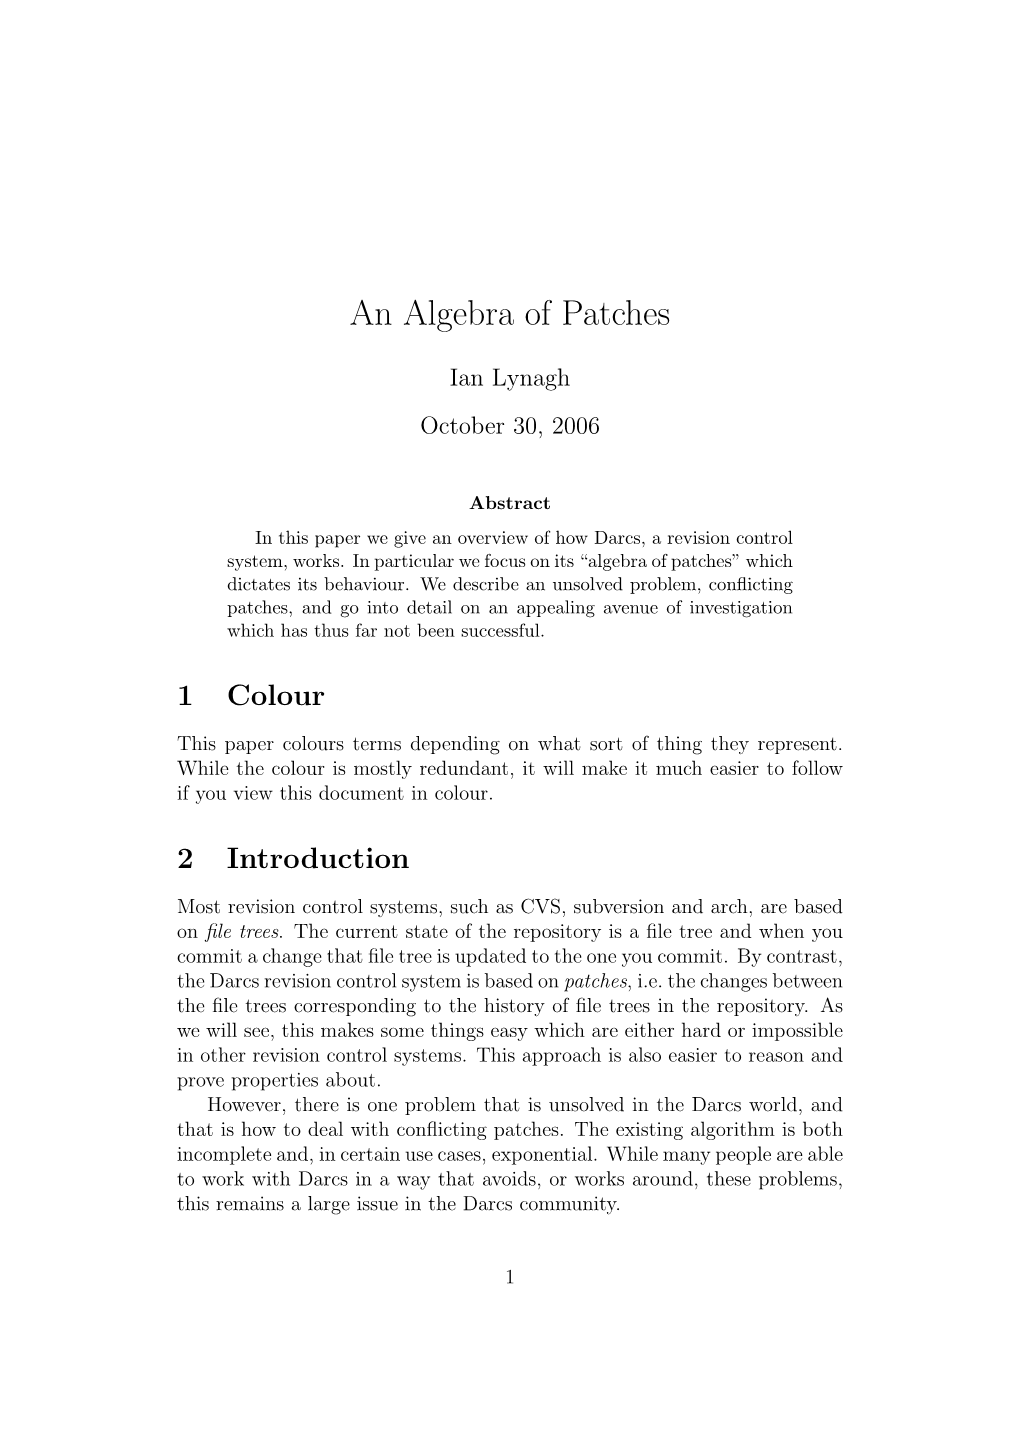 An Algebra of Patches